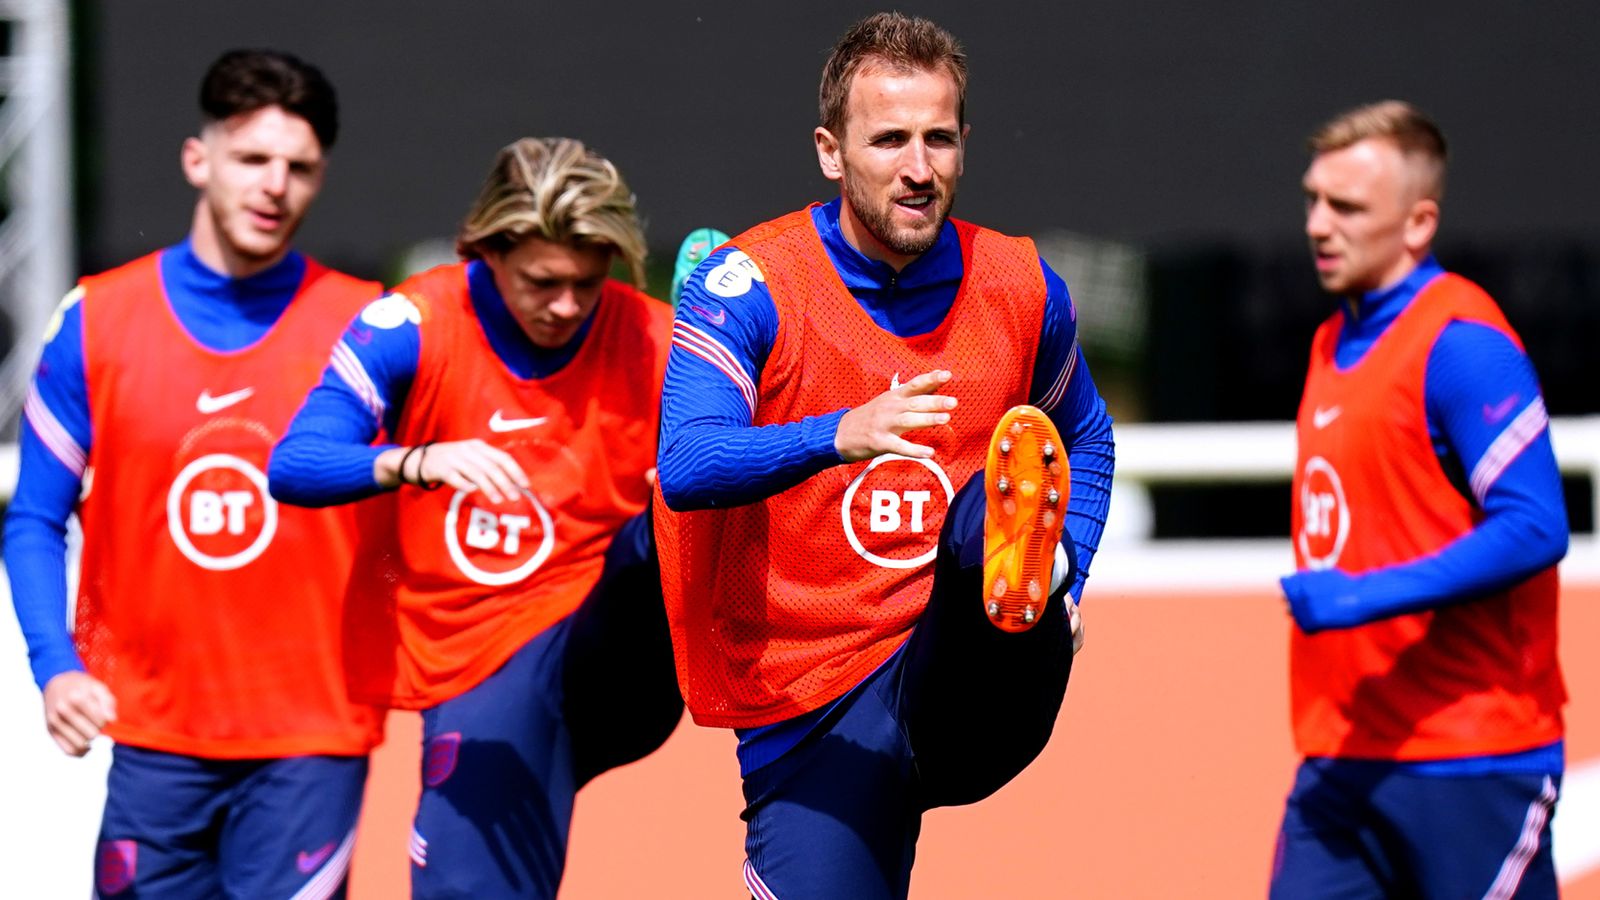 England vs Hungary live stream: Team news, predictions, how to watch for free